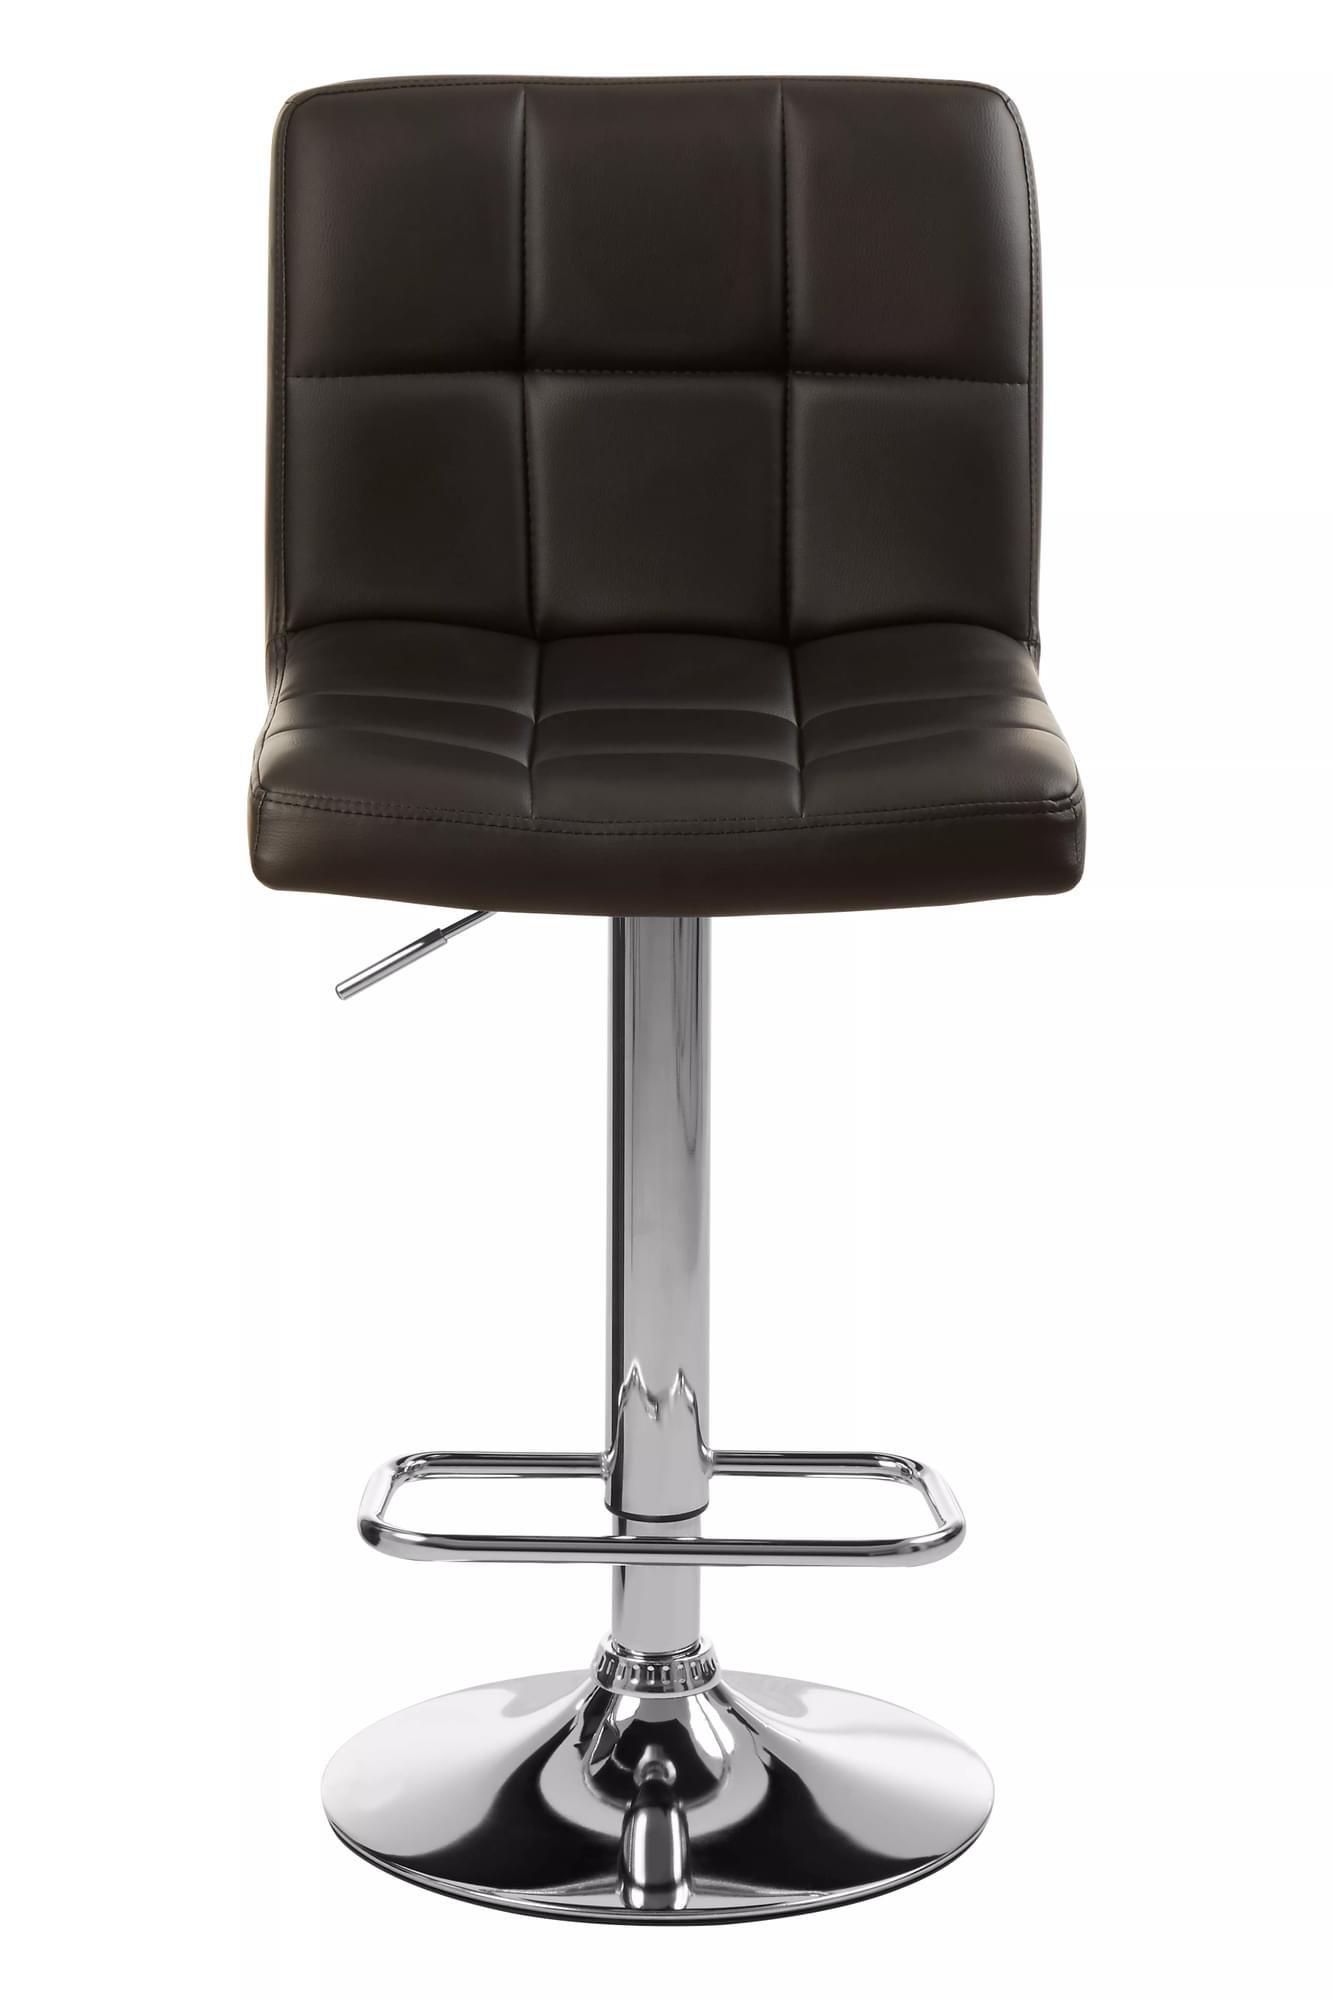 Interiors by Premier Baina Quilted Chrome Base Bar Stool